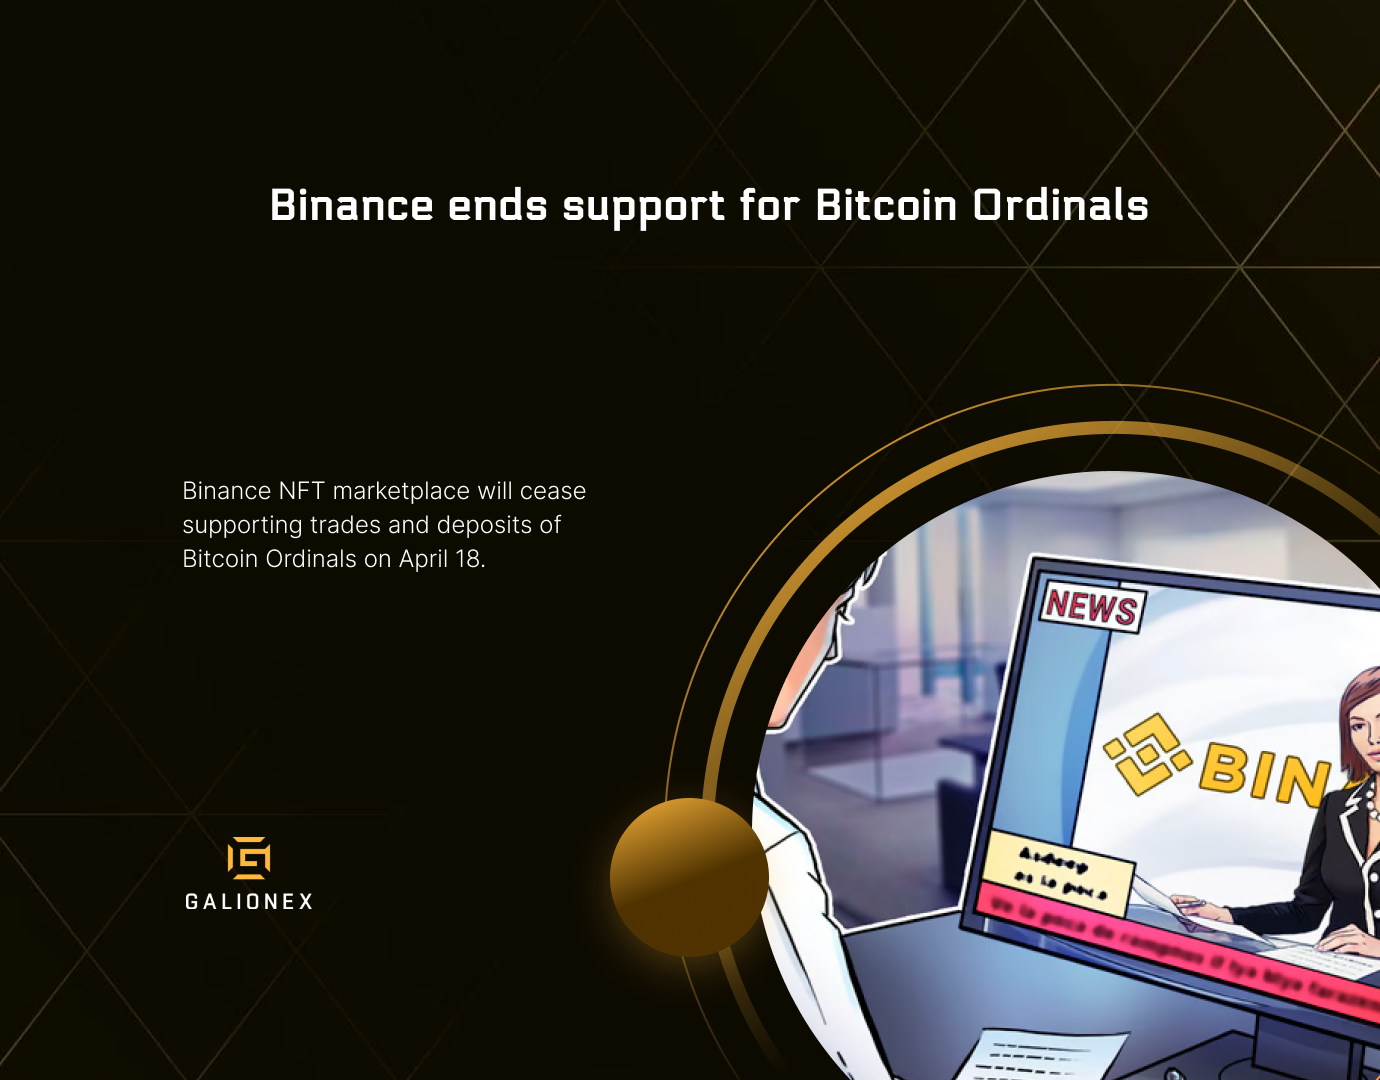 Binance ends support for Bitcoin Ordinals